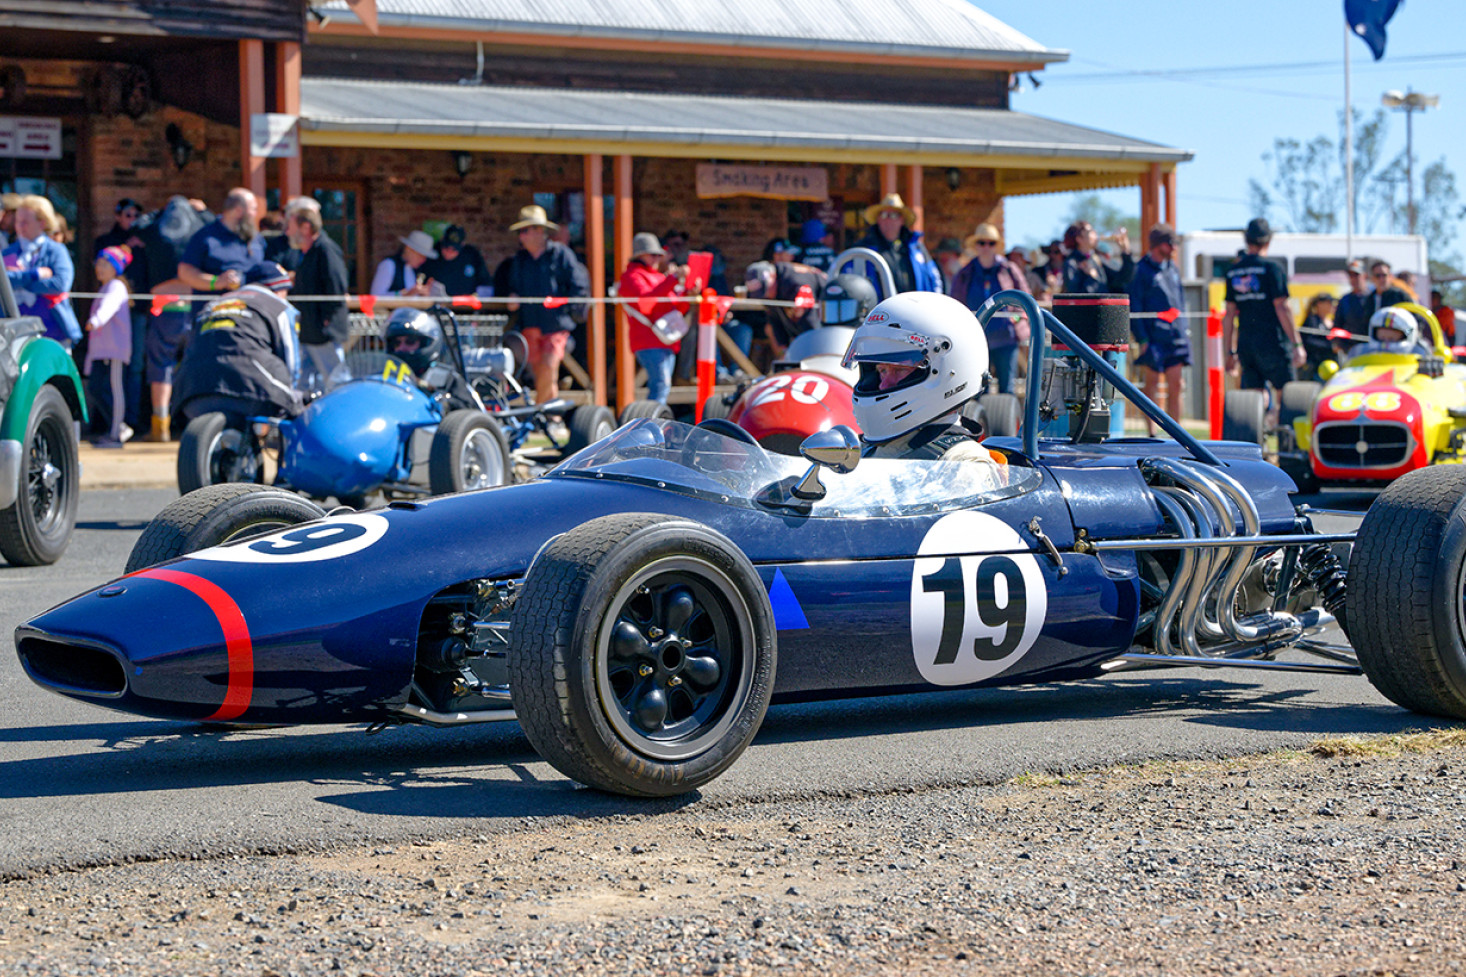 Open wheeler race cars at Leyburn provide a nostalgic view of racing from times past.